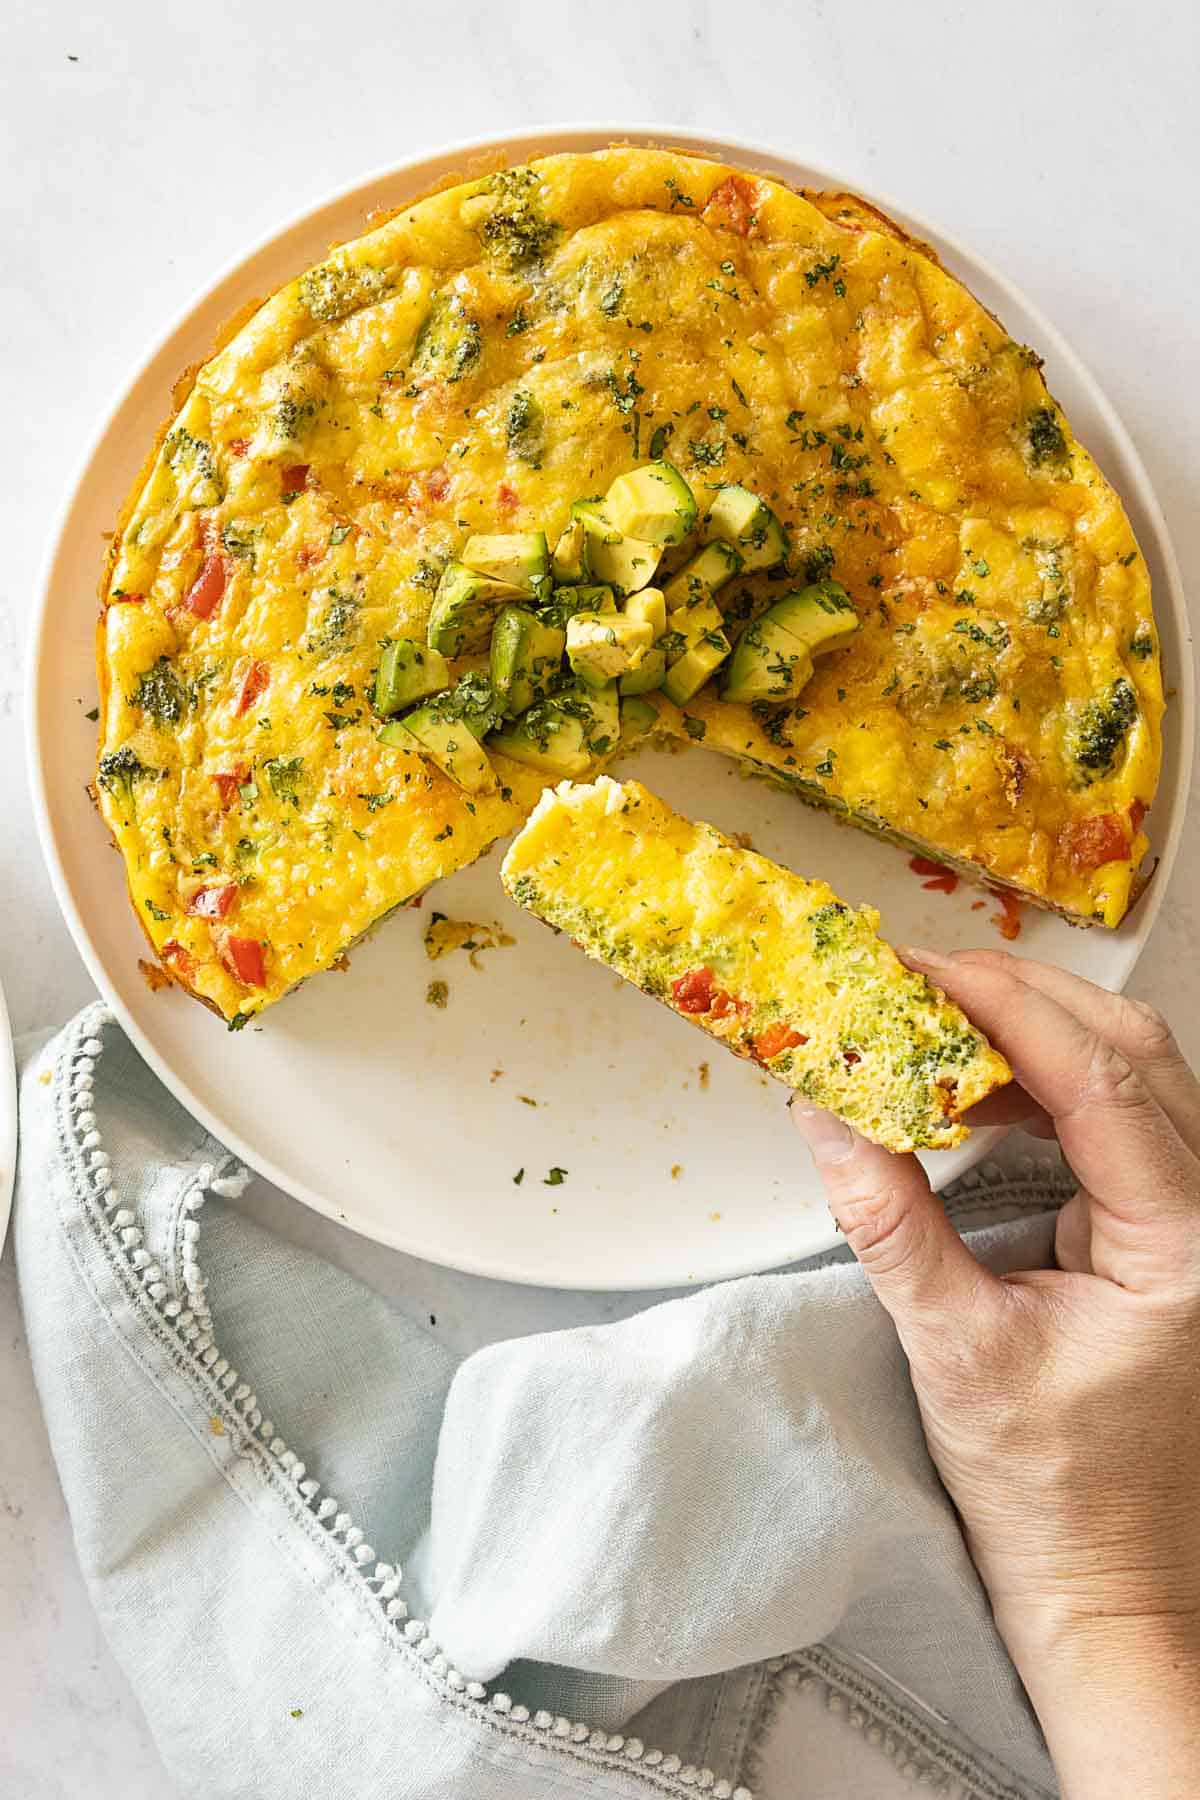 Vegetabel Frittata with 1/4 cup out and one piece in hand to show texture.